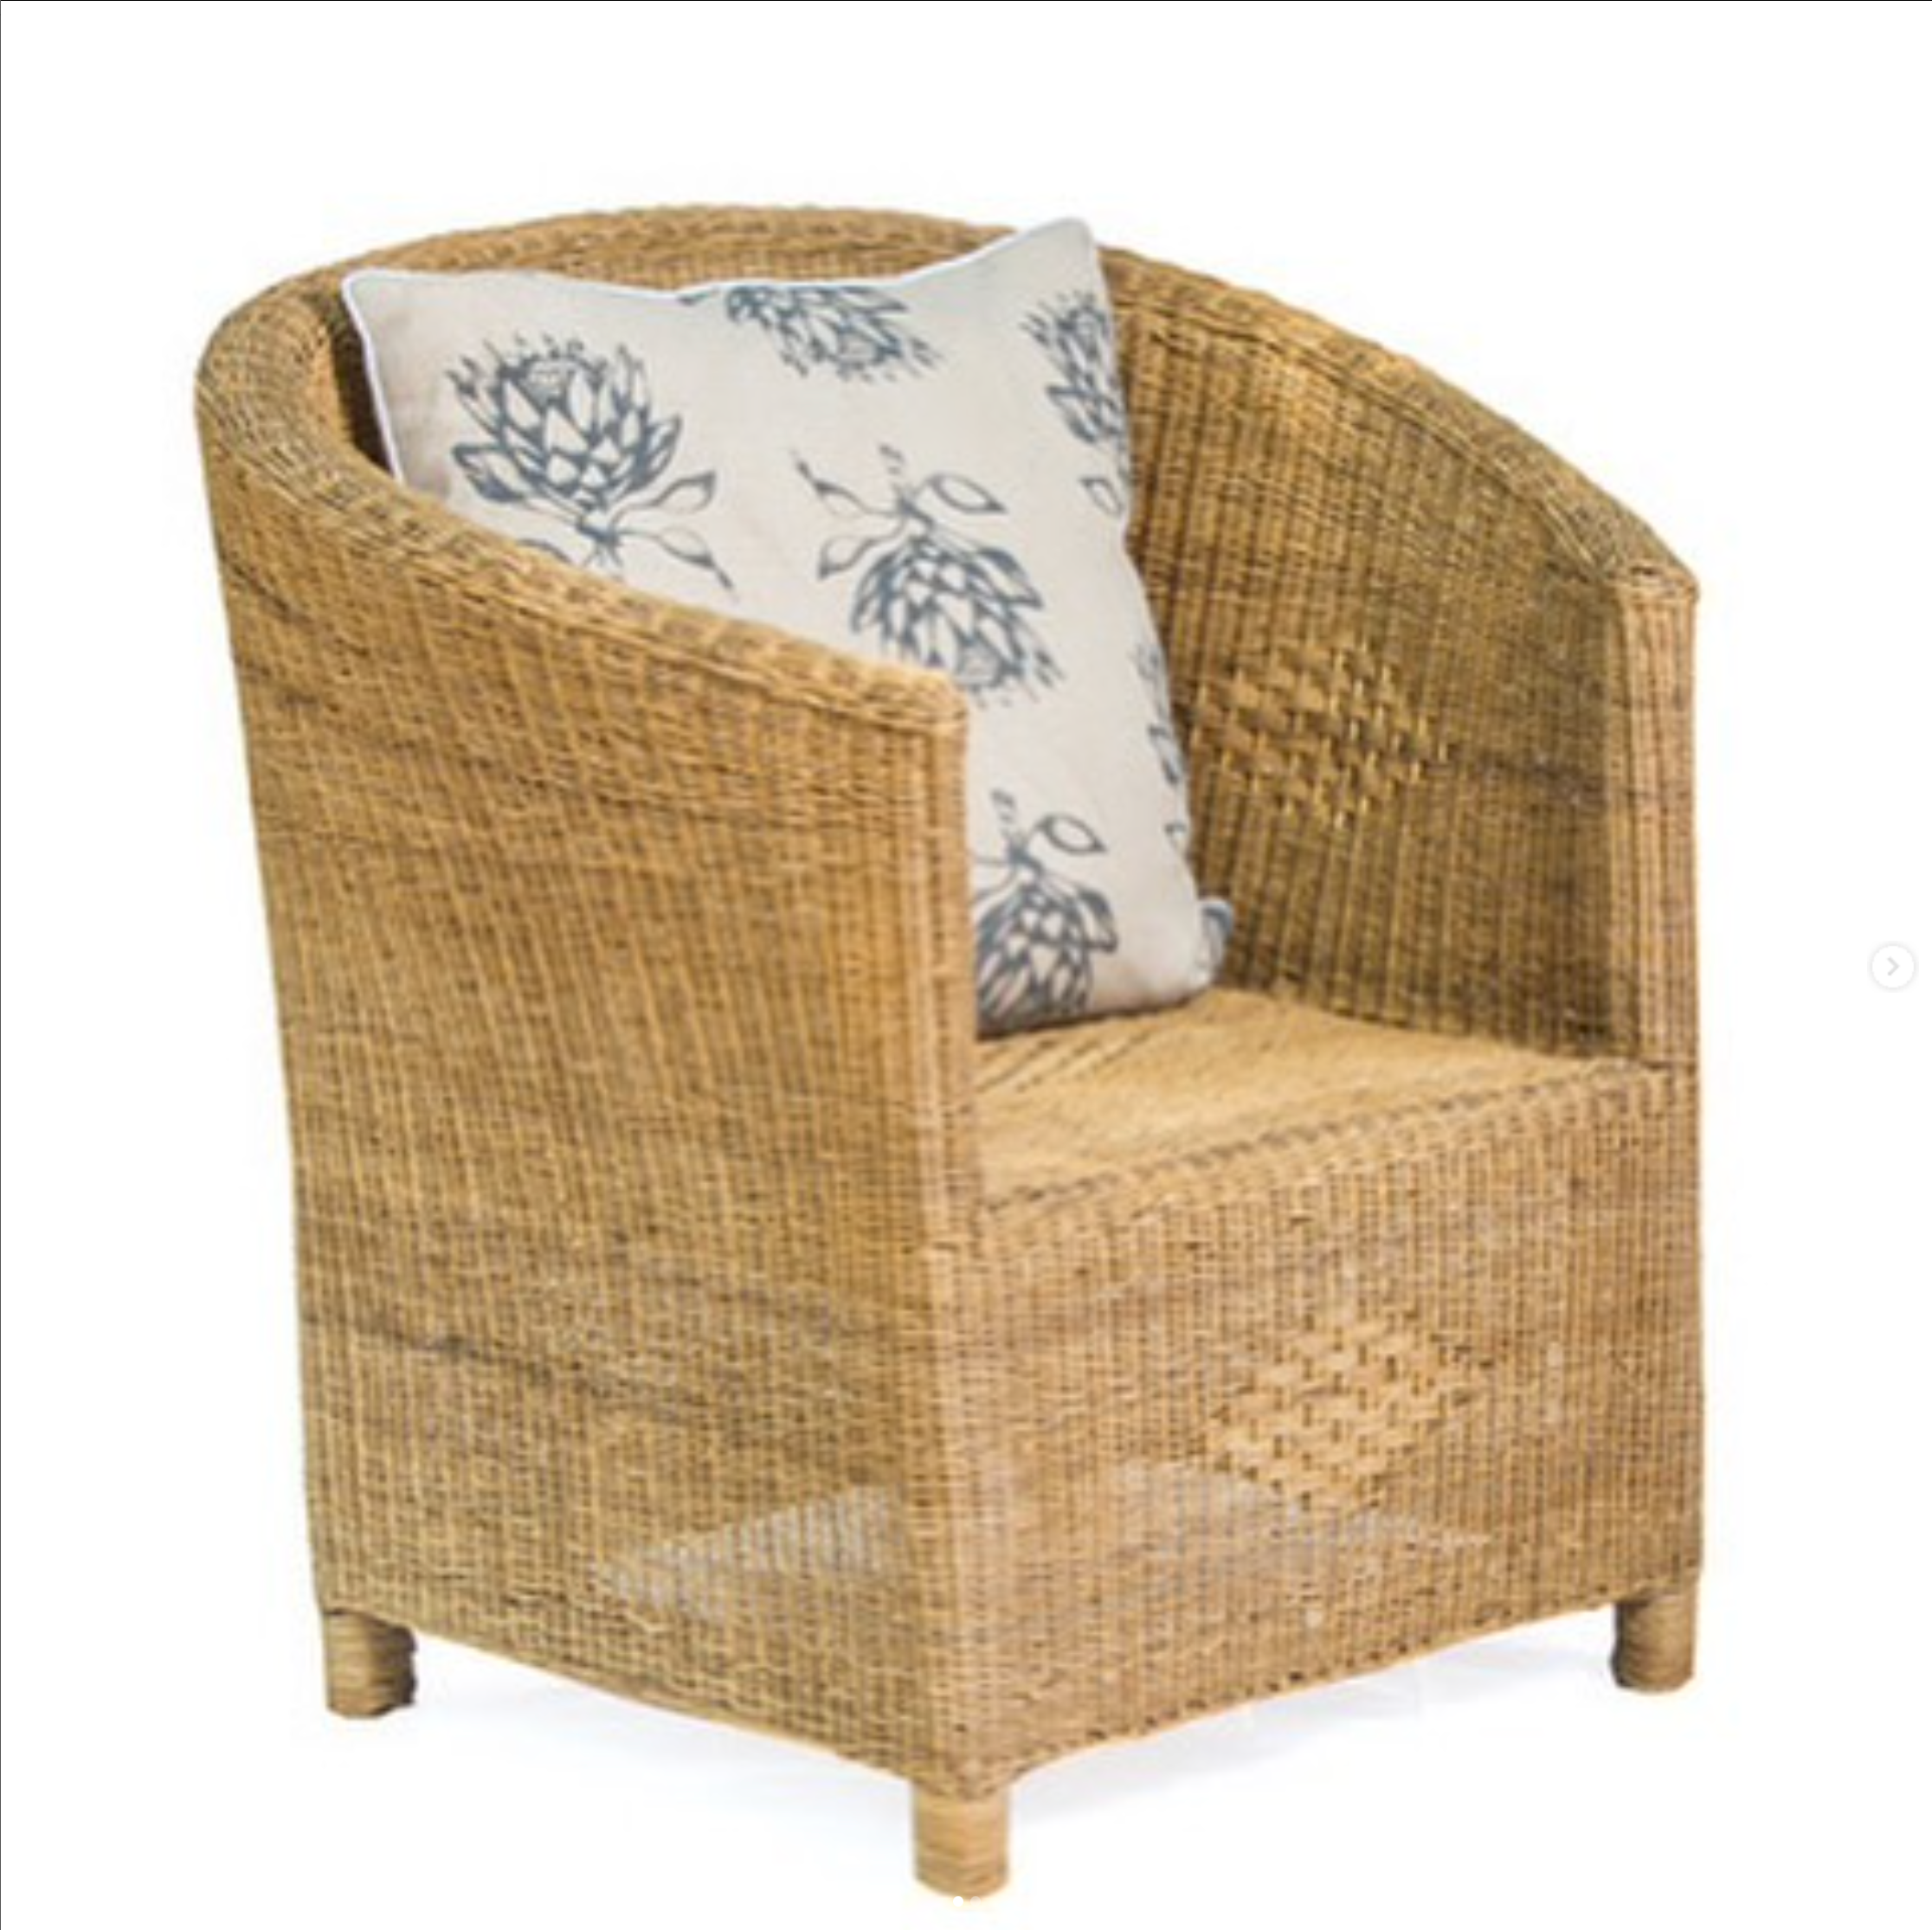 Club Woven Cane Chair - Limited Edition